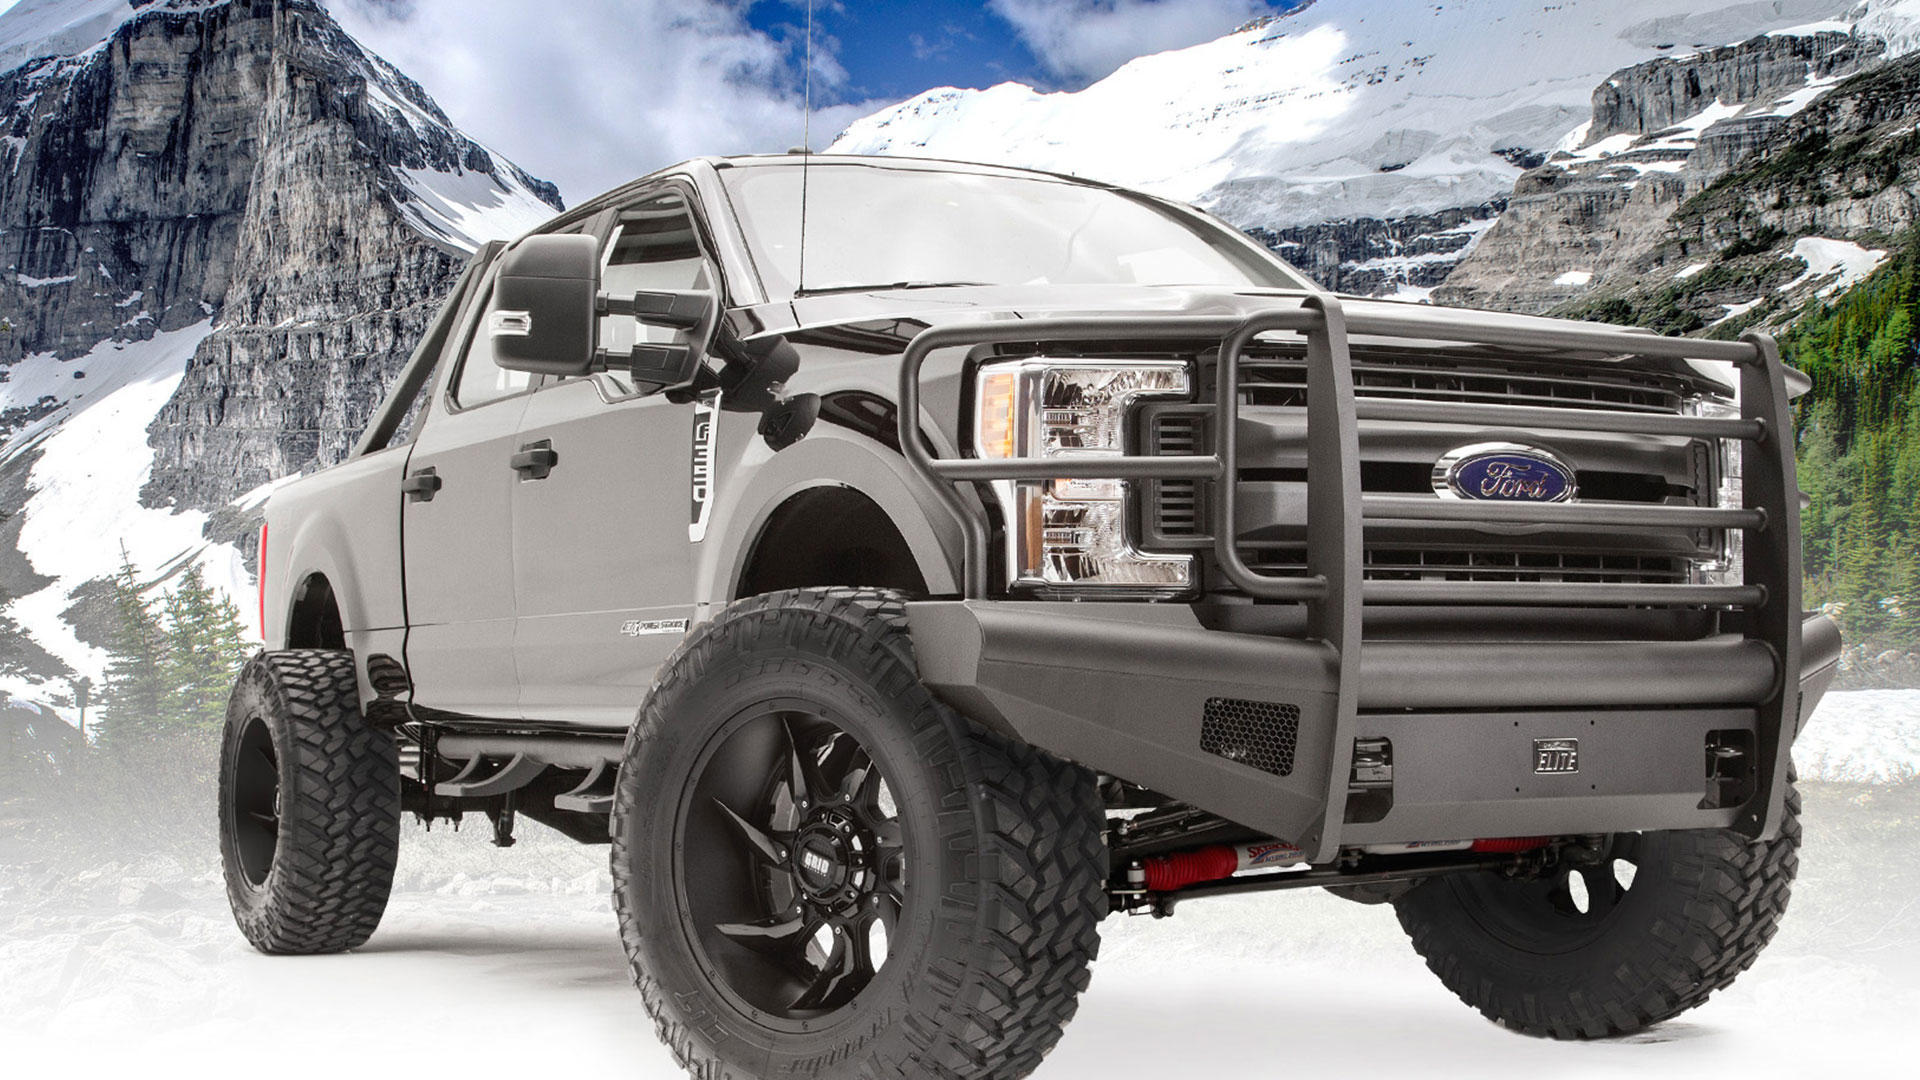 Ford Superduty with Fab Fours front bumper in mountains